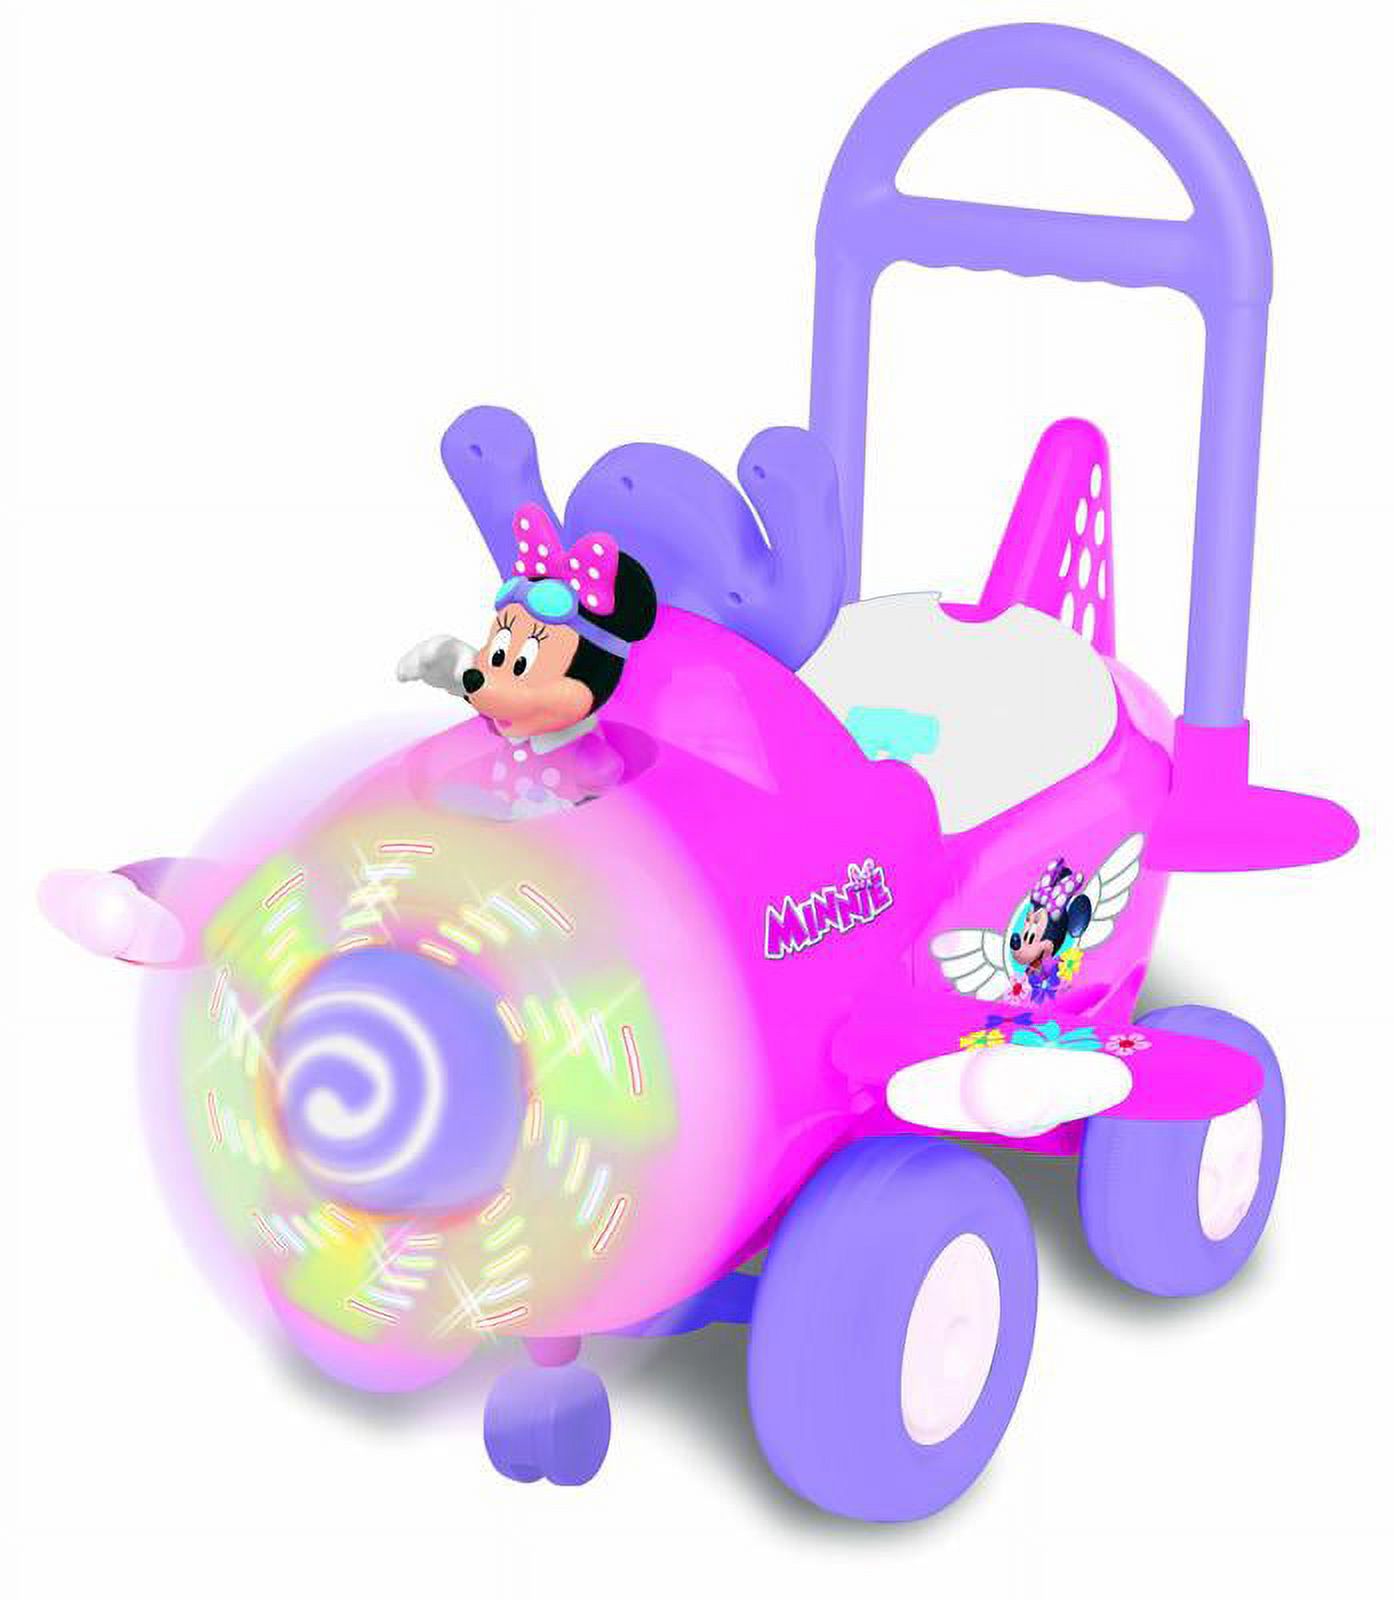 Disney Deluxe Minnie Mouse Plane Activity Ride-on with Lights and Sounds - image 5 of 8